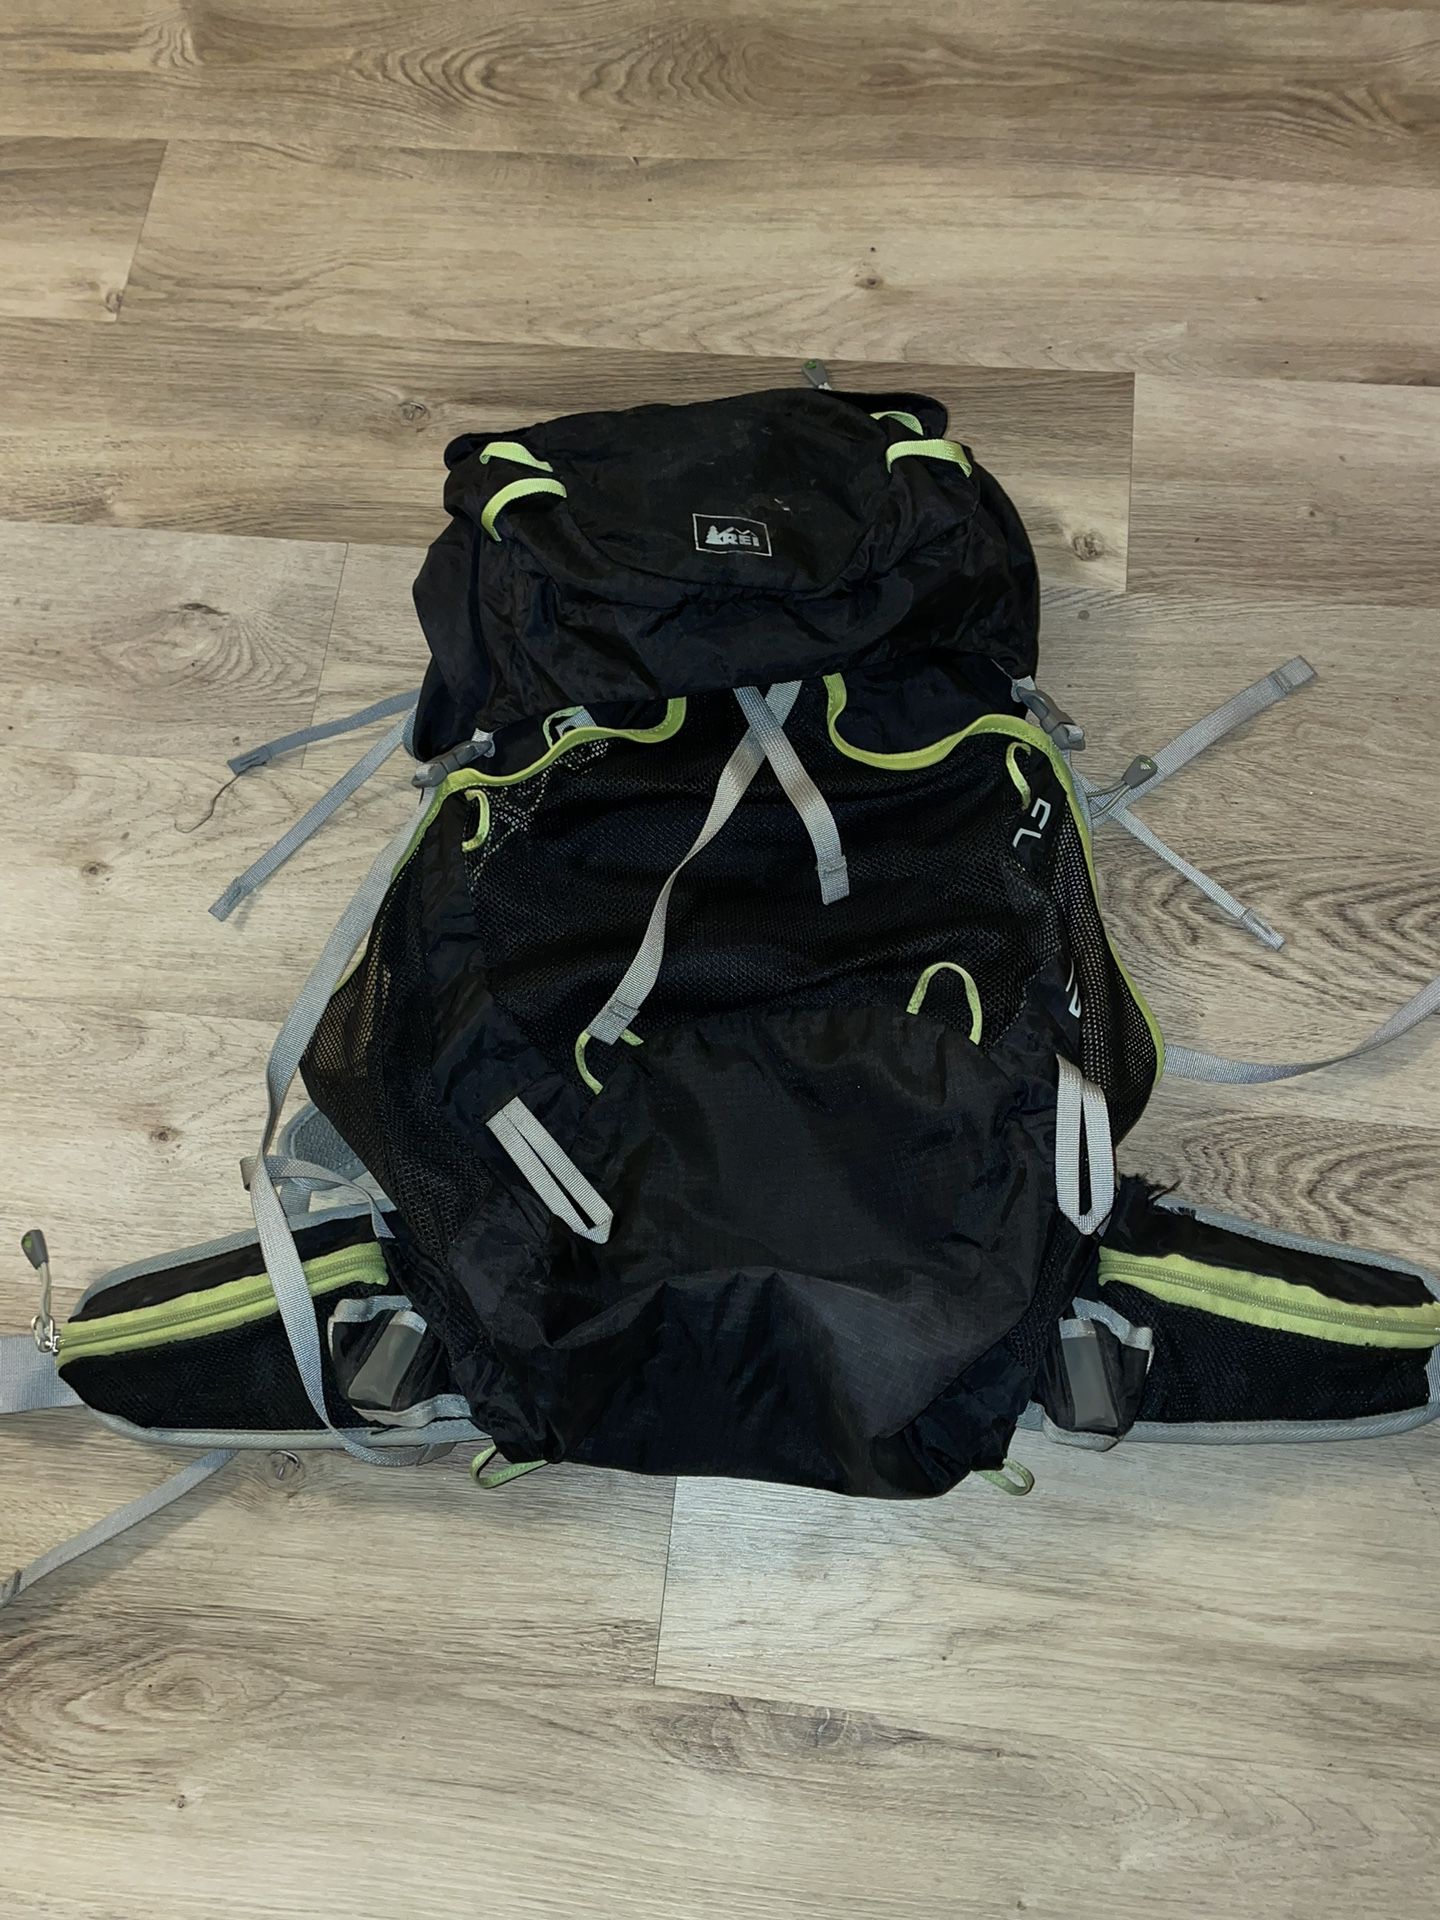 REI FLASH 45 UL BACKPACKING PACK